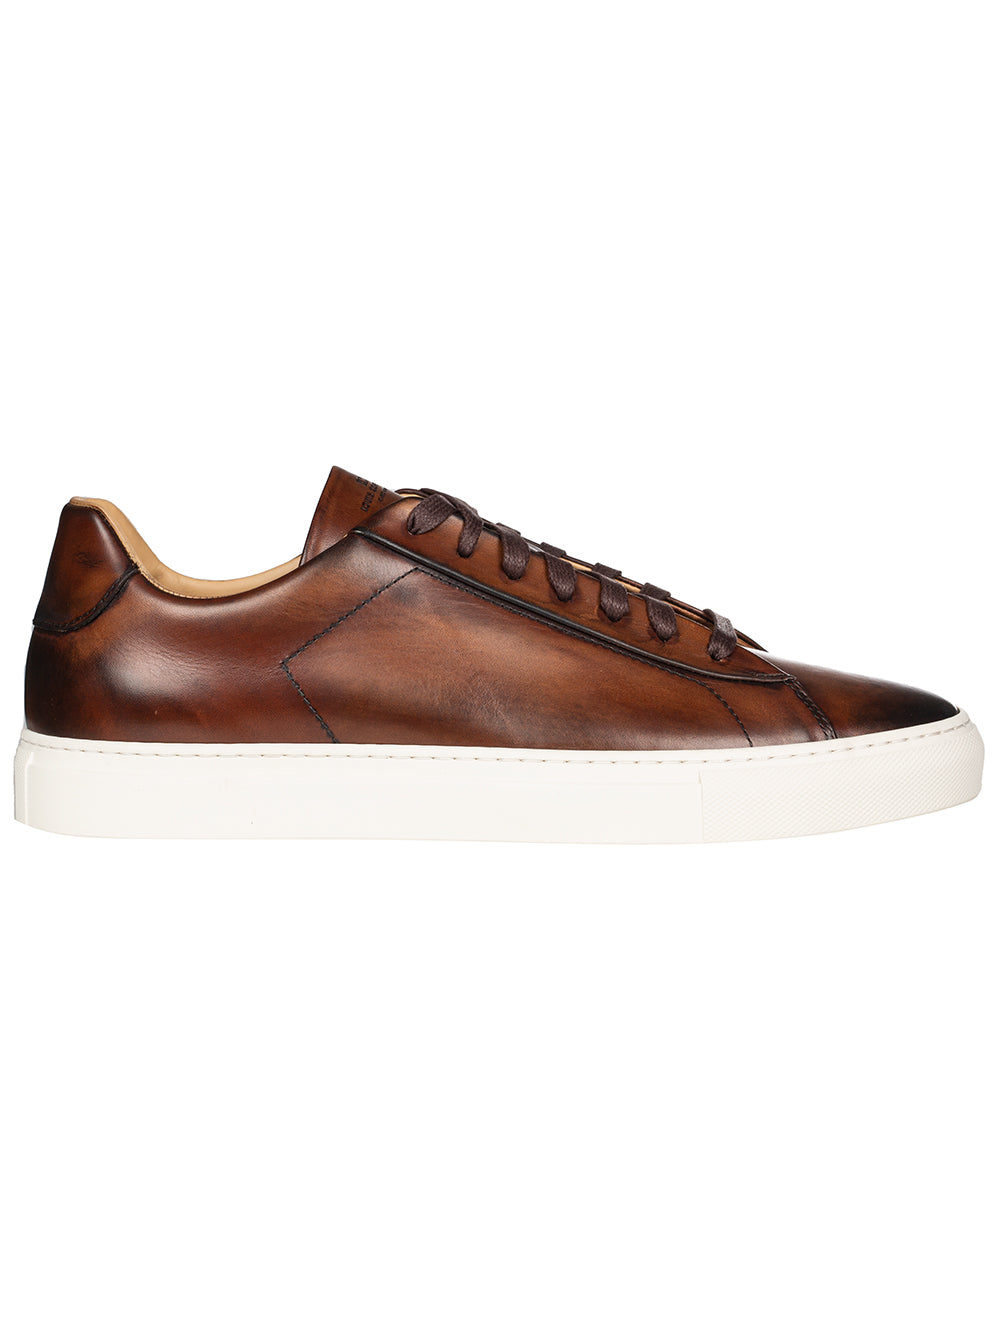 Painted Finish Sneaker Brown